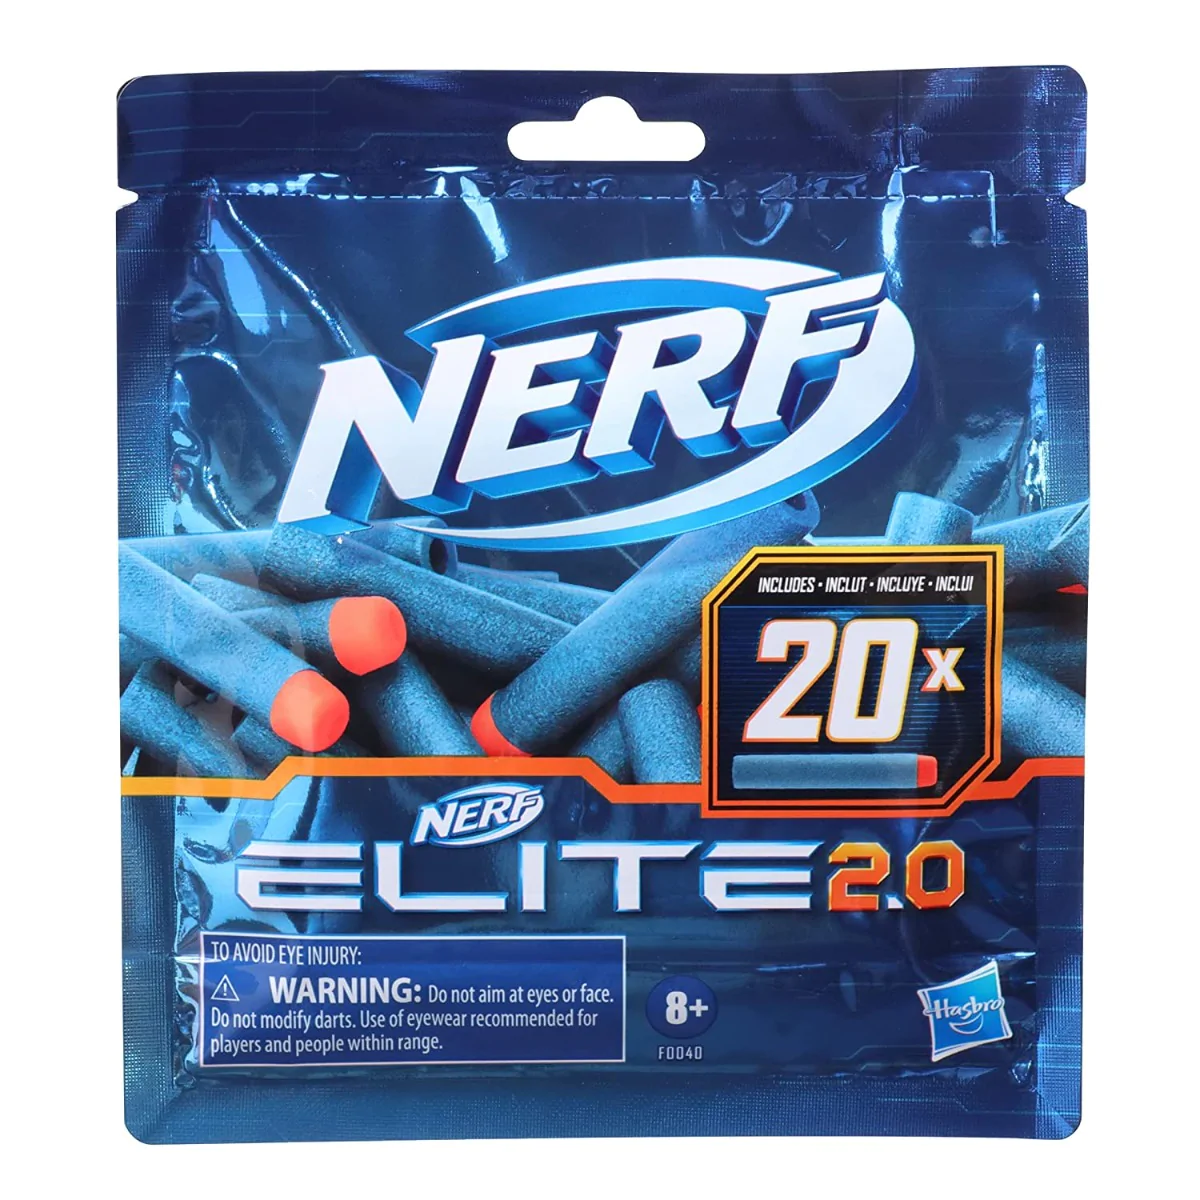 nerf_elite_2.0_20-dart_refill_pack_20_official_nerf_foam_darts_for_nerf_elite_2.0_blasters_compatible_with_all_nerf_elite_blasters_2